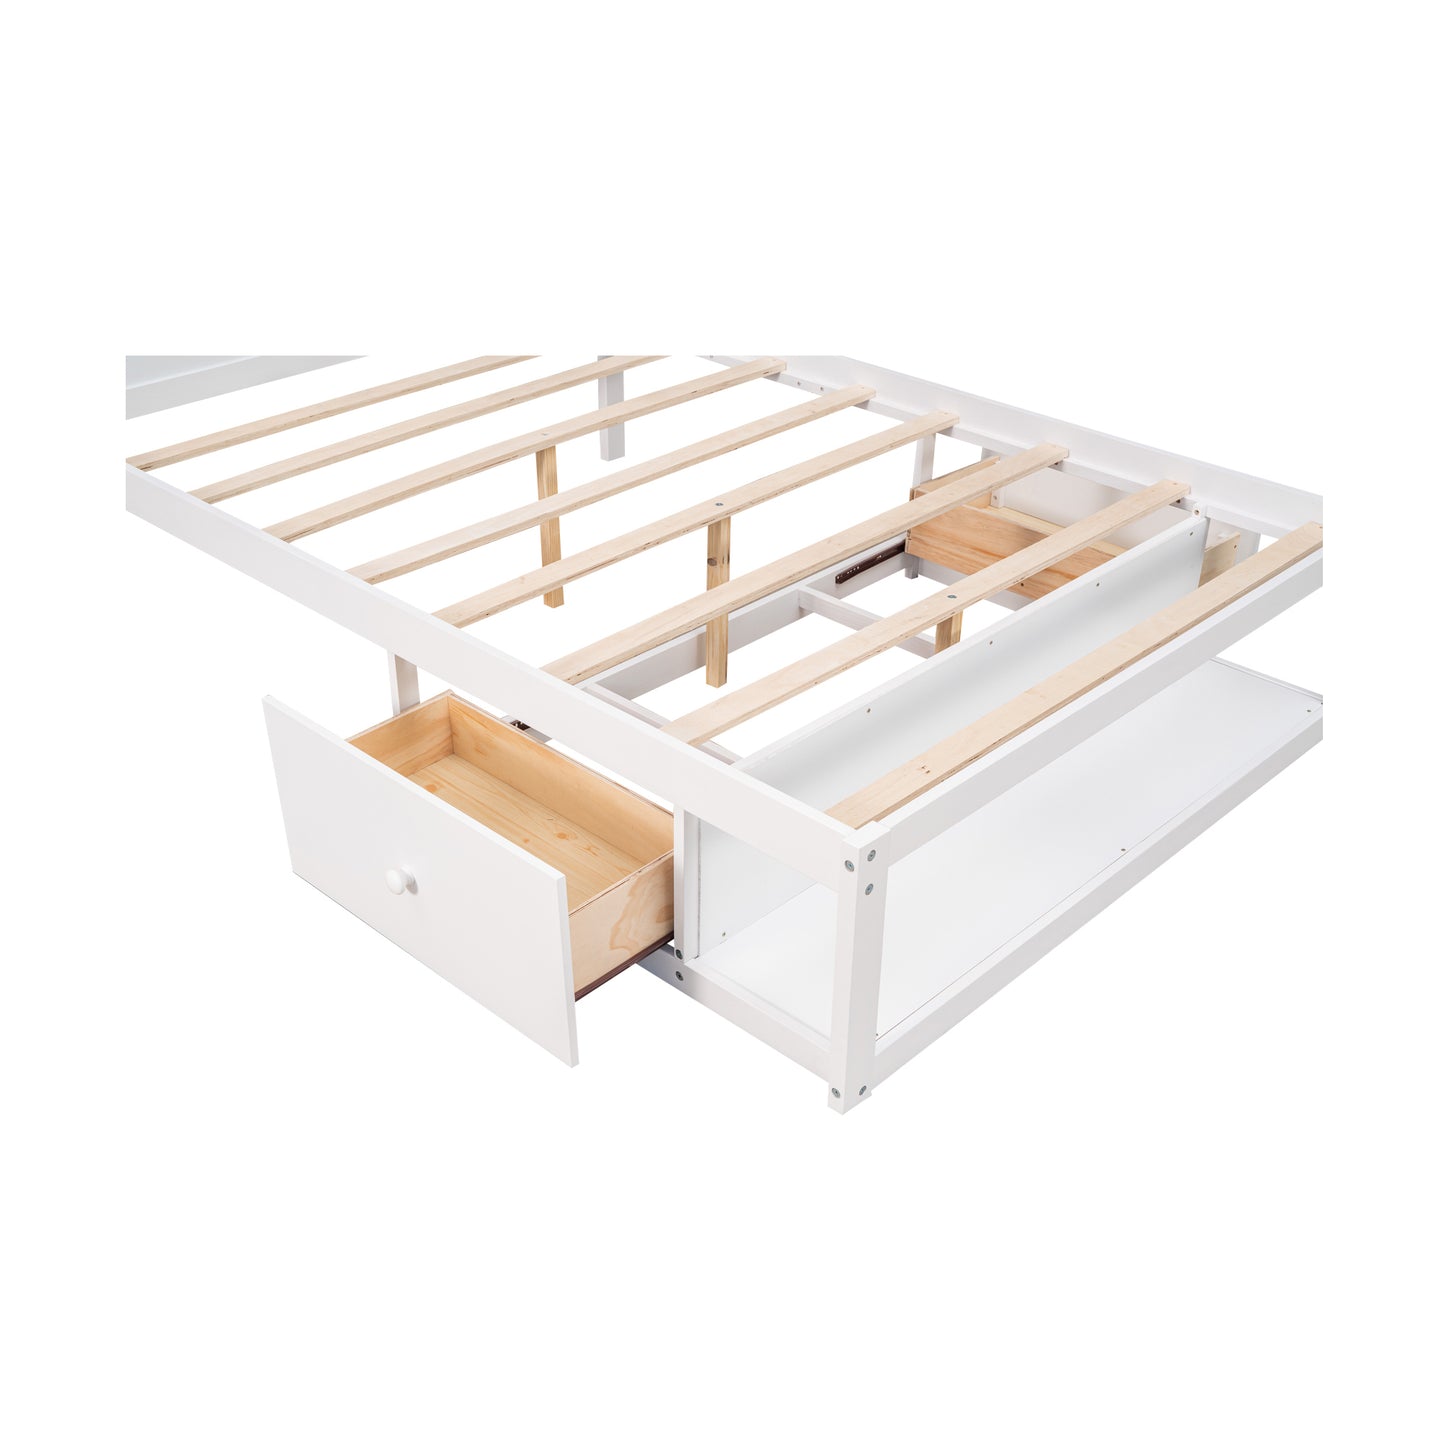 Full Size Platform Bed with Drawer on the Each Side and Shelf on the End of the Bed, White